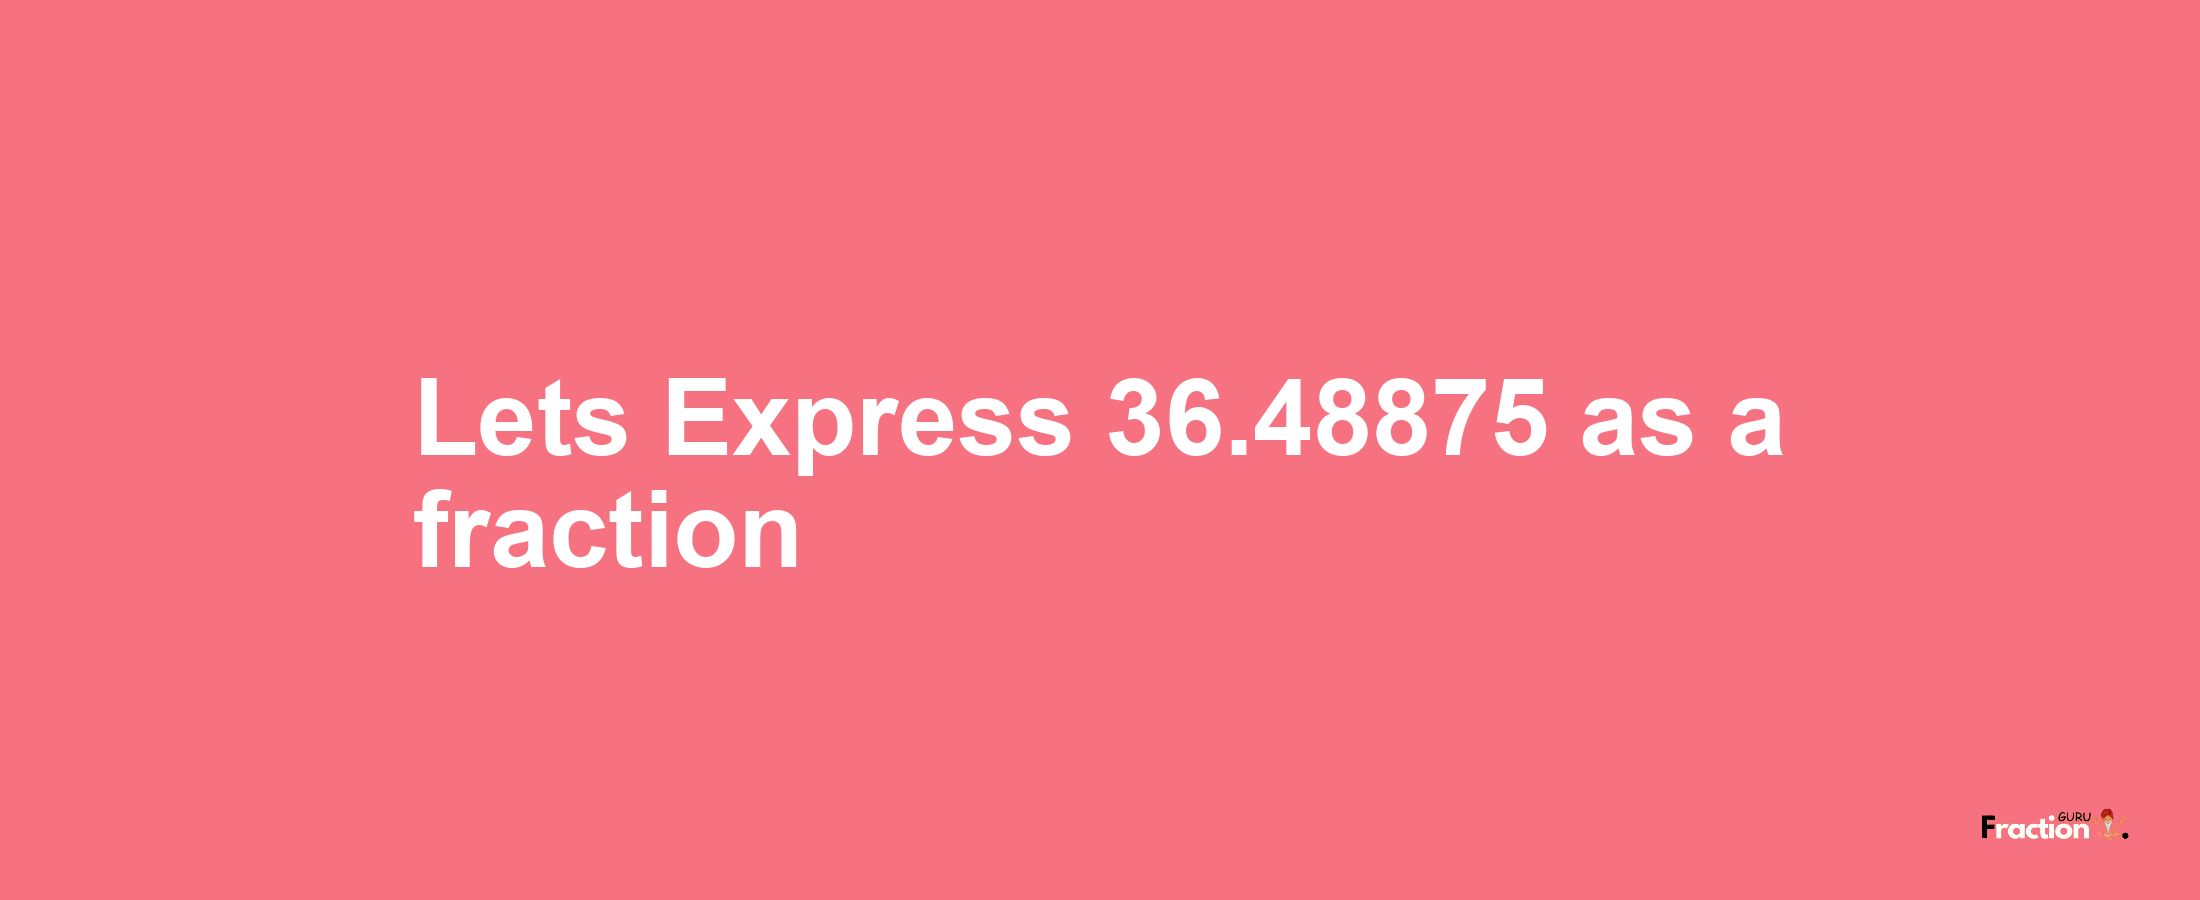 Lets Express 36.48875 as afraction